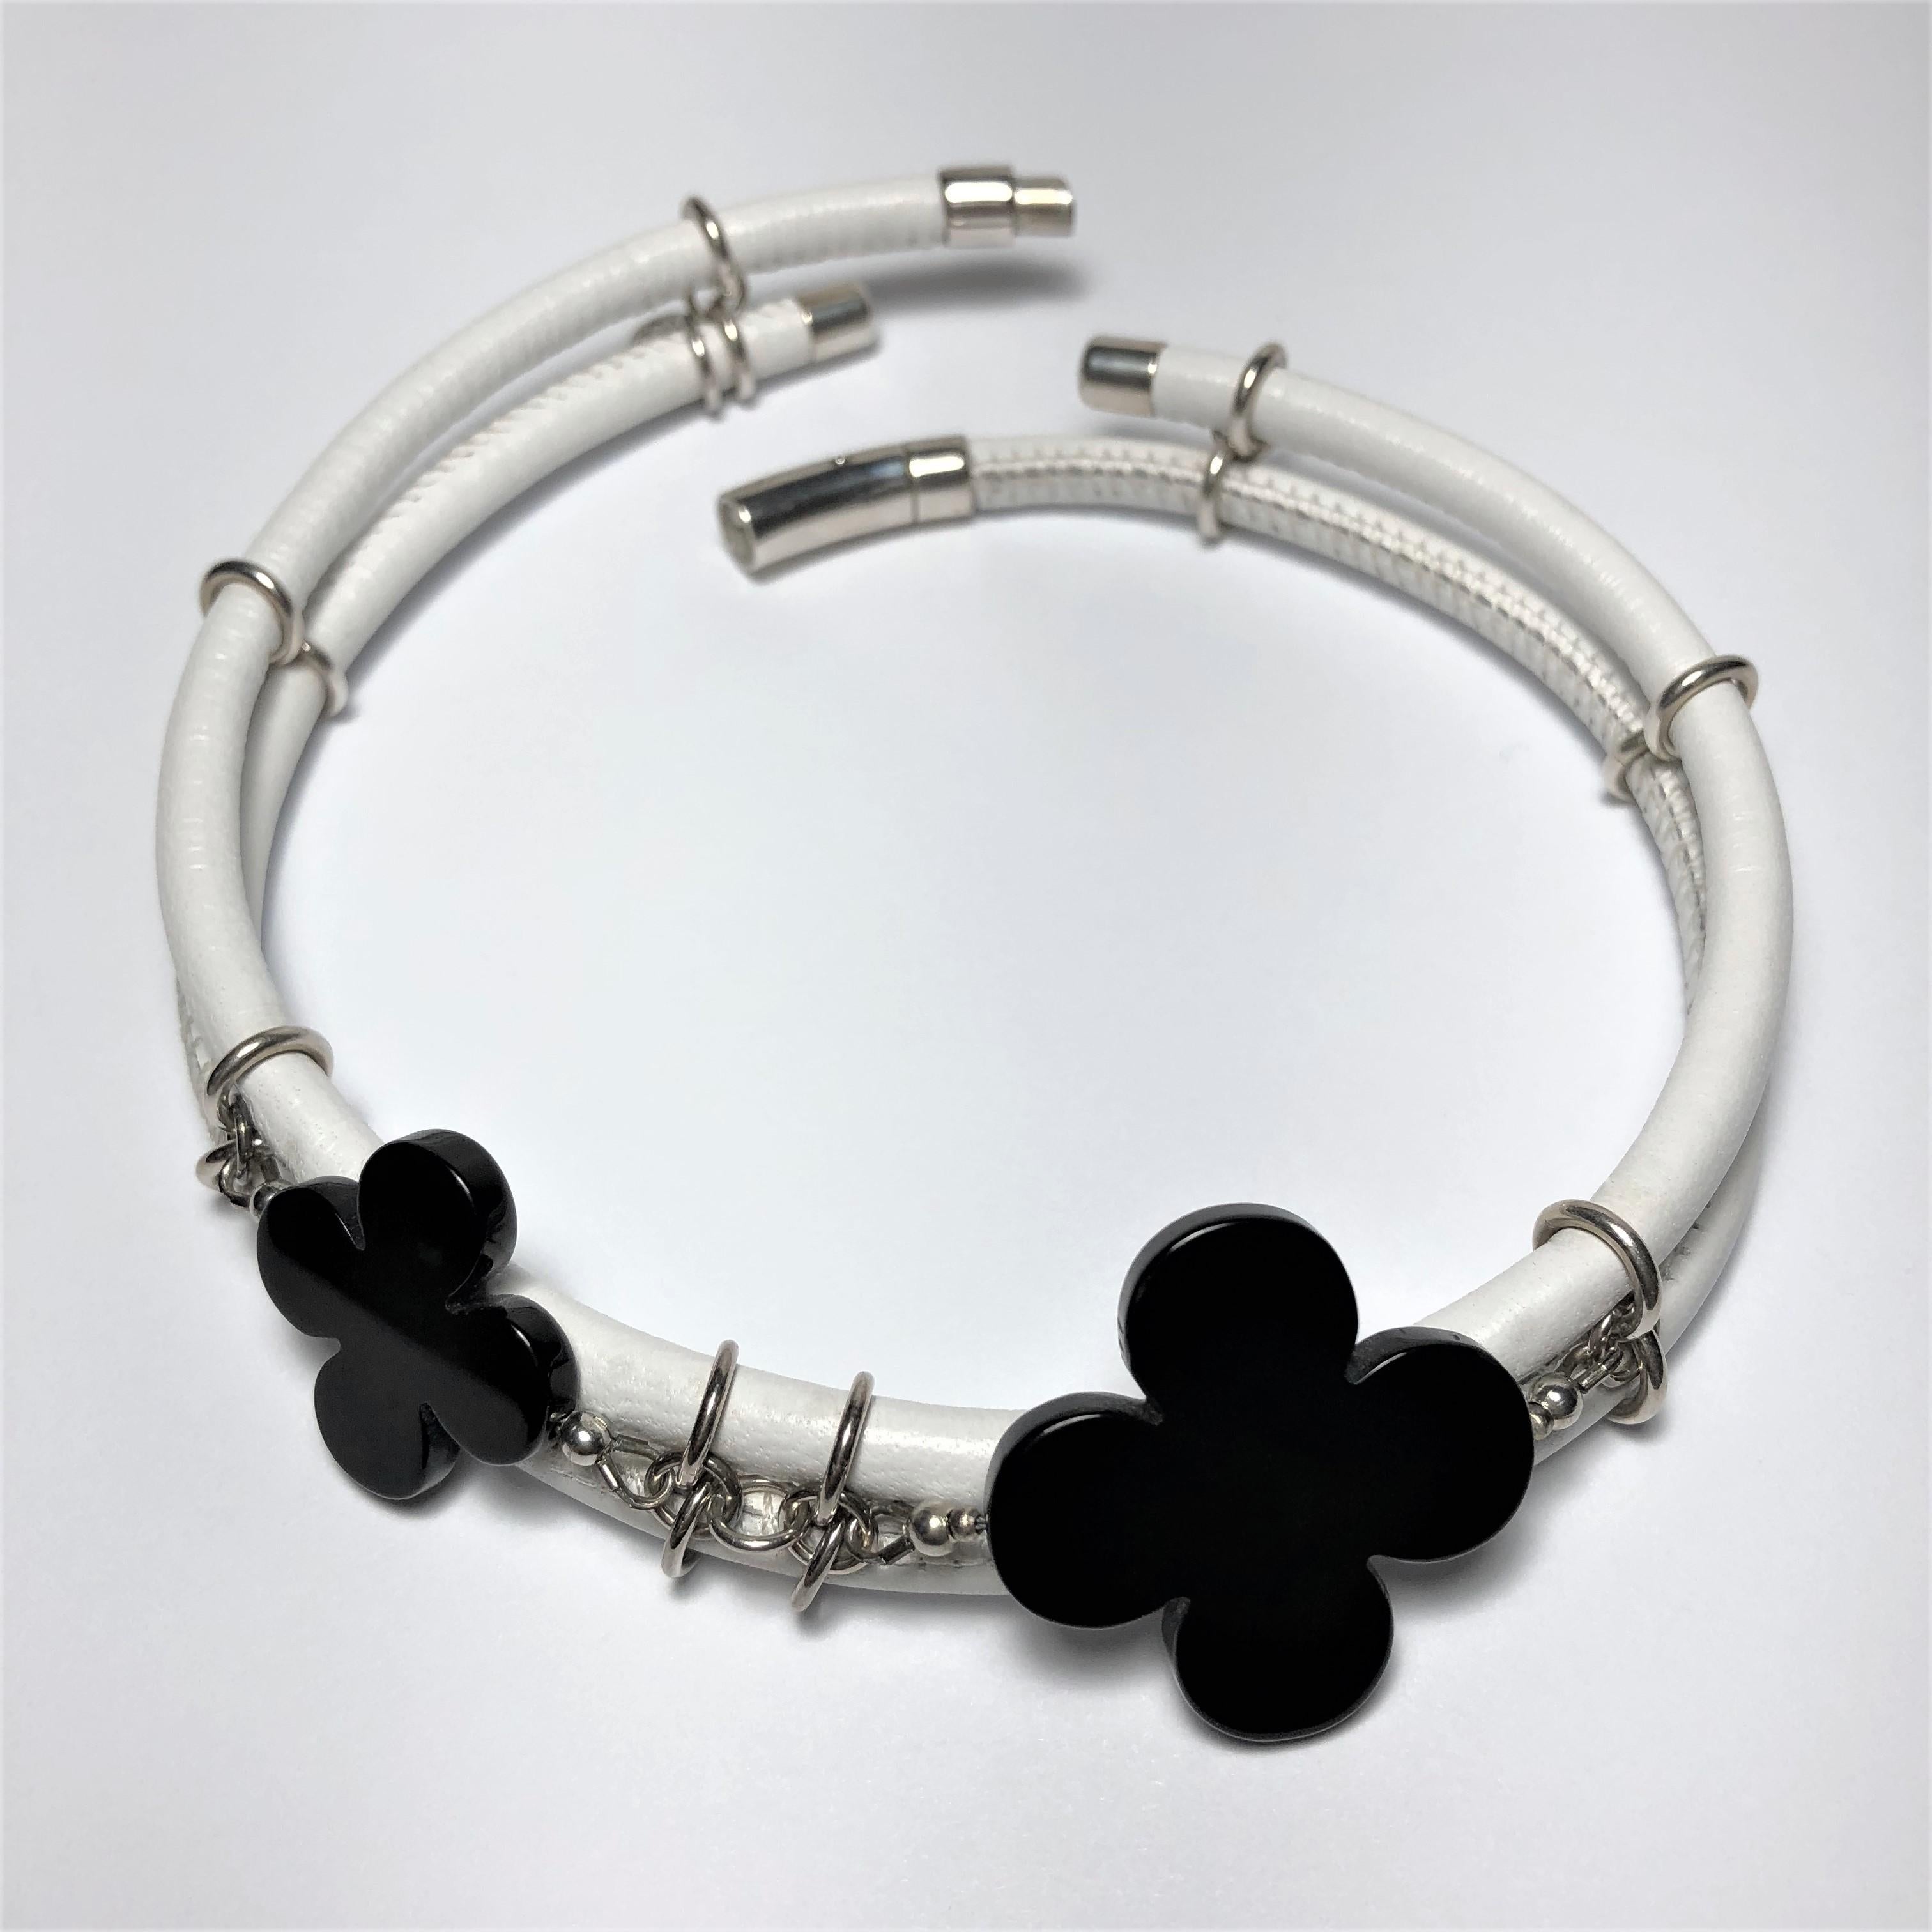 Rock Lily ( NEW ) White Leather Choker With Black Agate Clovers In 925 Silver
The white stitched leather ( nappa ) double necklace made with two black agate clovers cut gemstones and connecting by silver links and a fancy barrel lock. 
Length: 14.0